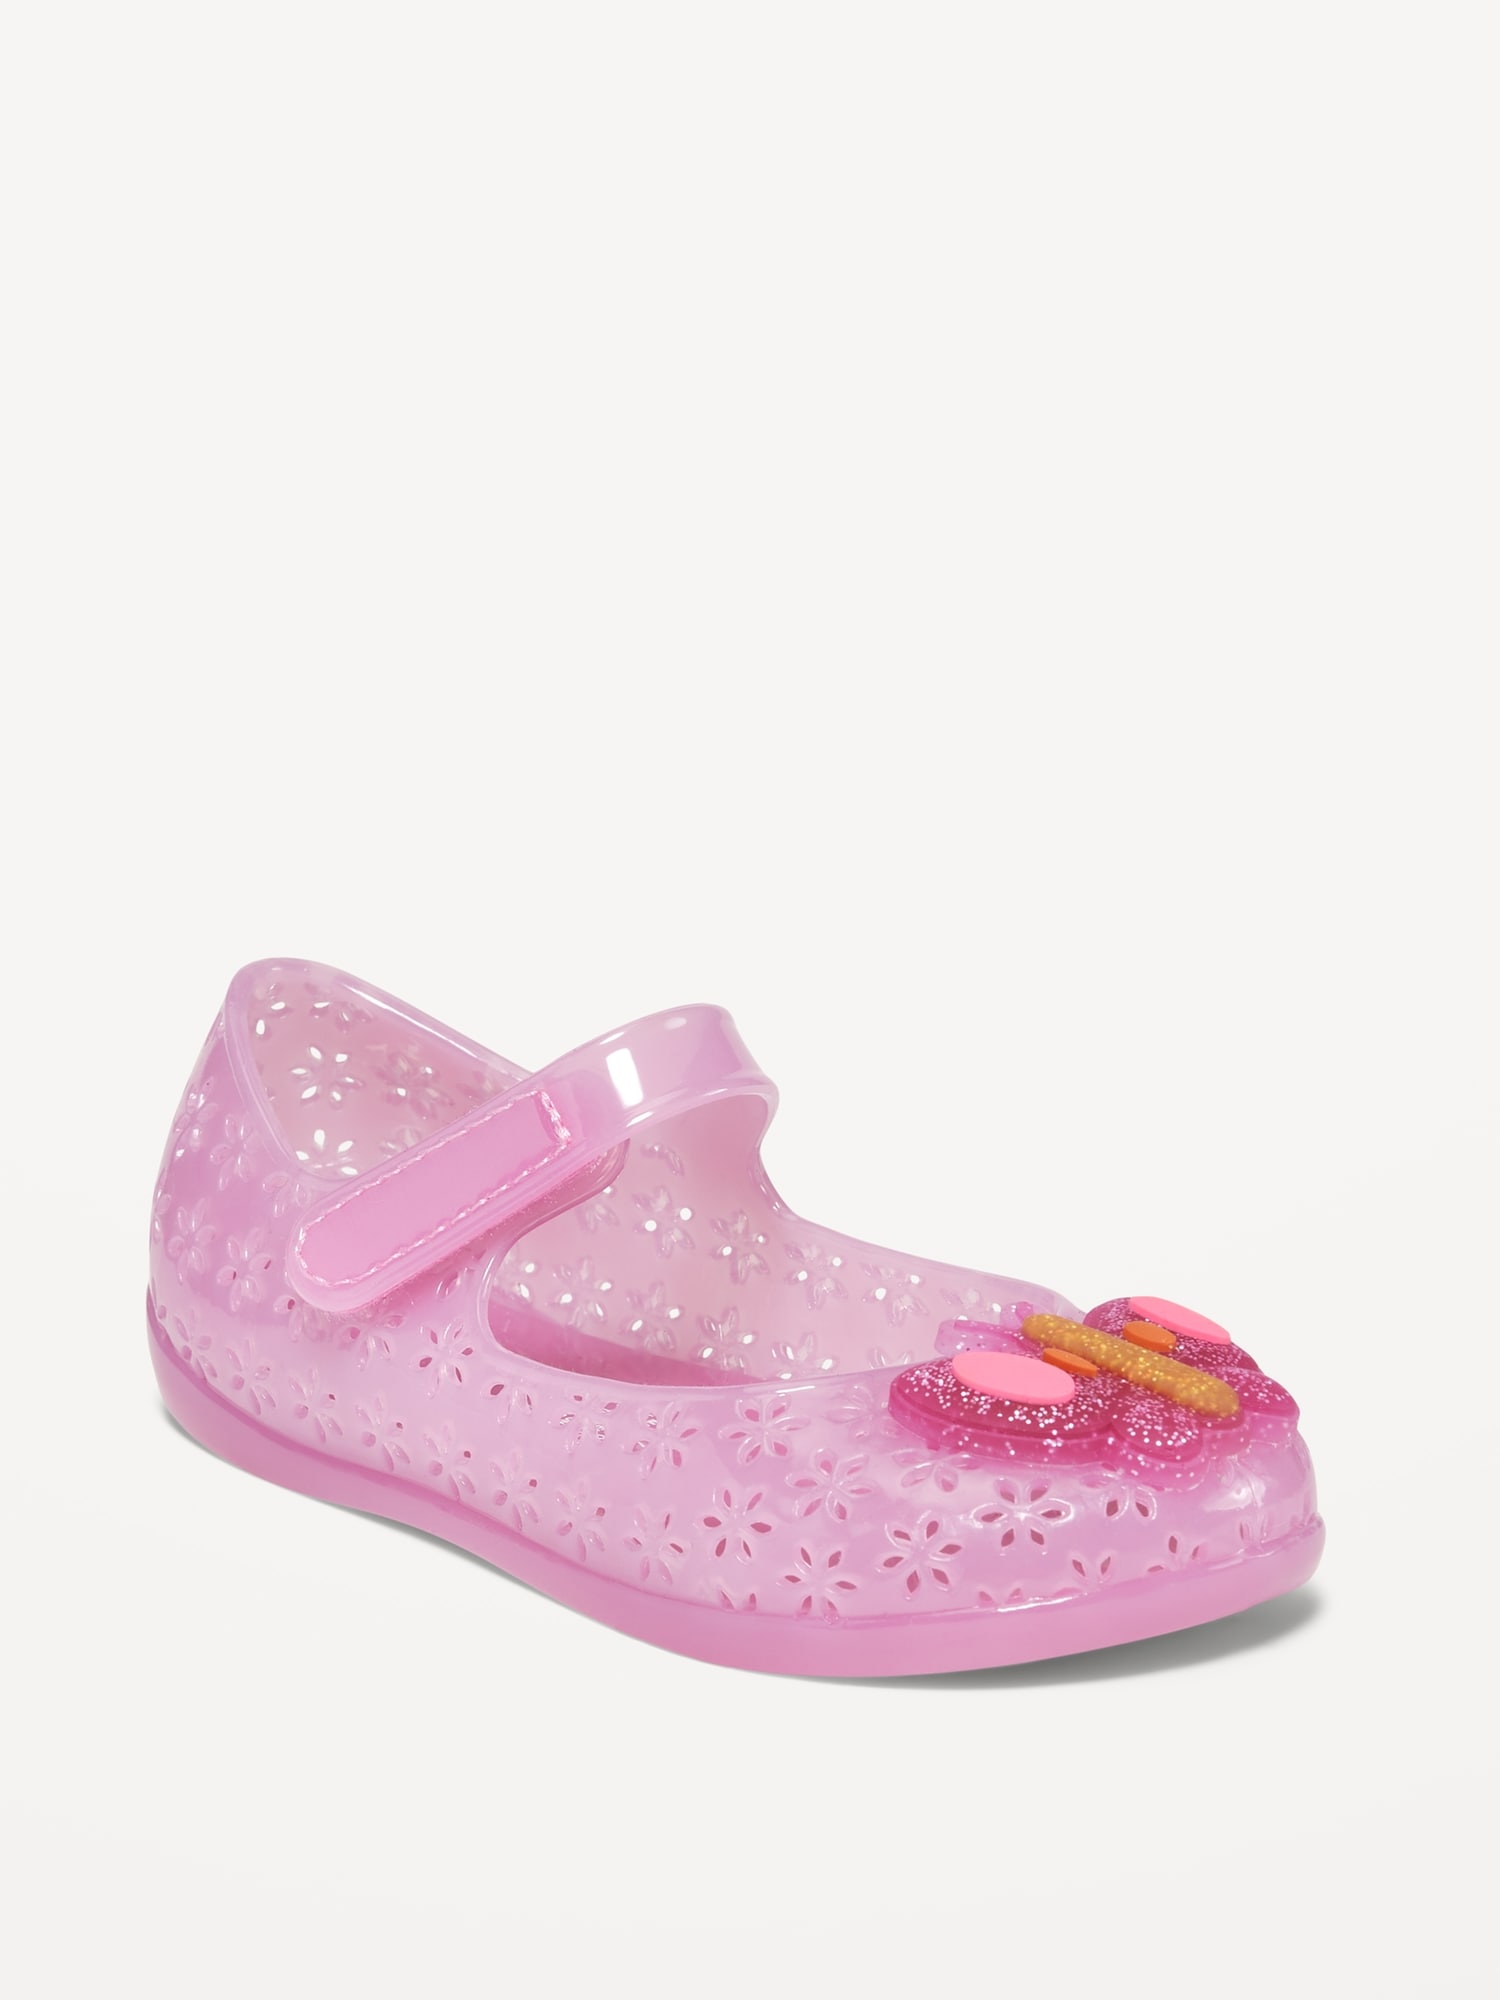 Old Navy Floral-Cutout Jelly Mary-Jane Flats for Toddler Girls pink. 1